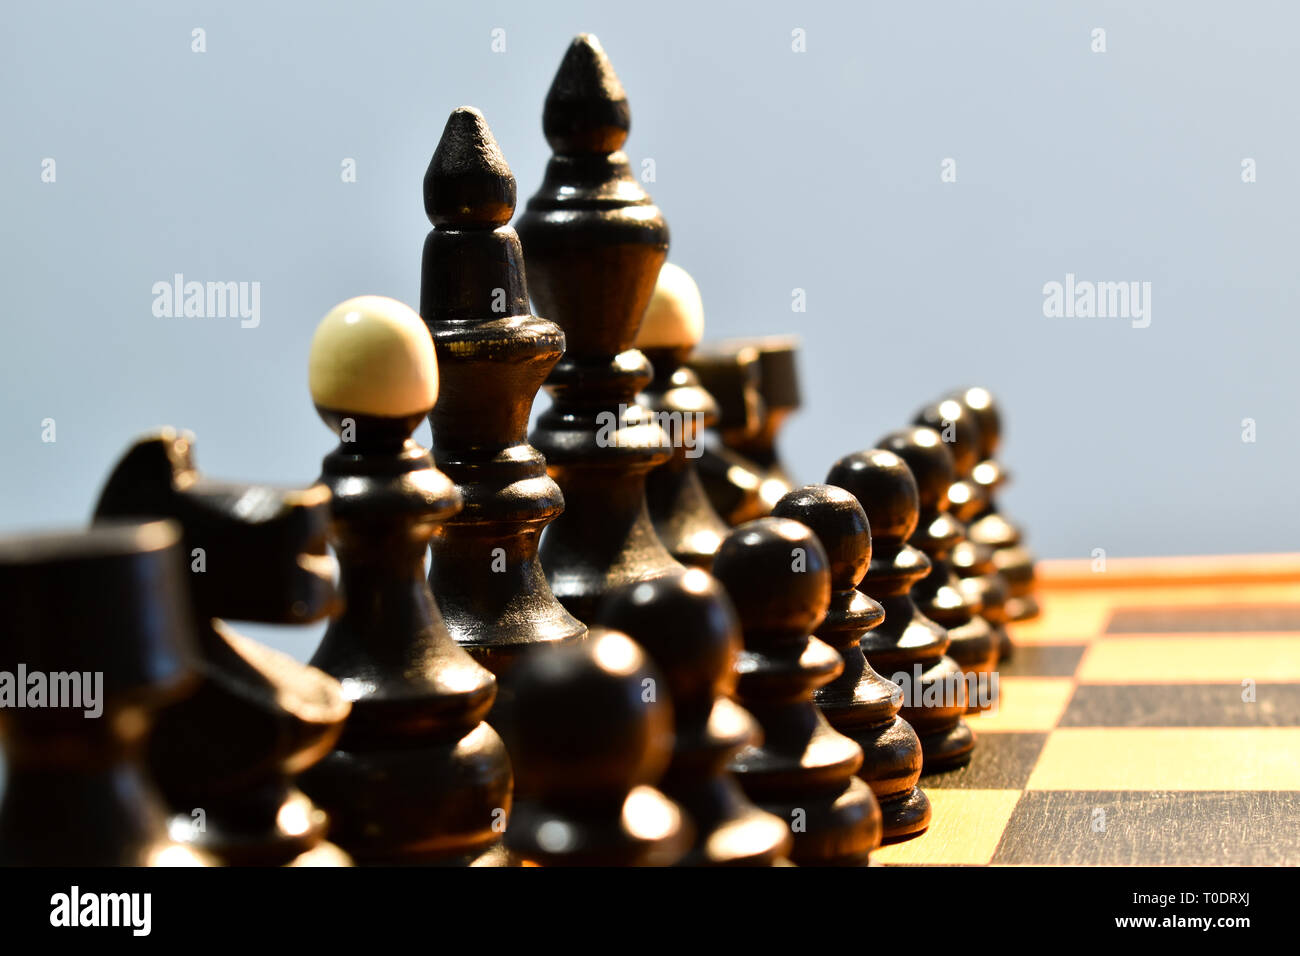 Vintage Chess Board Checkers Pawns Knights Rooks Bishops Queen King Stock  Photo by ©malyarevsky.stock.gmail.com 484395334